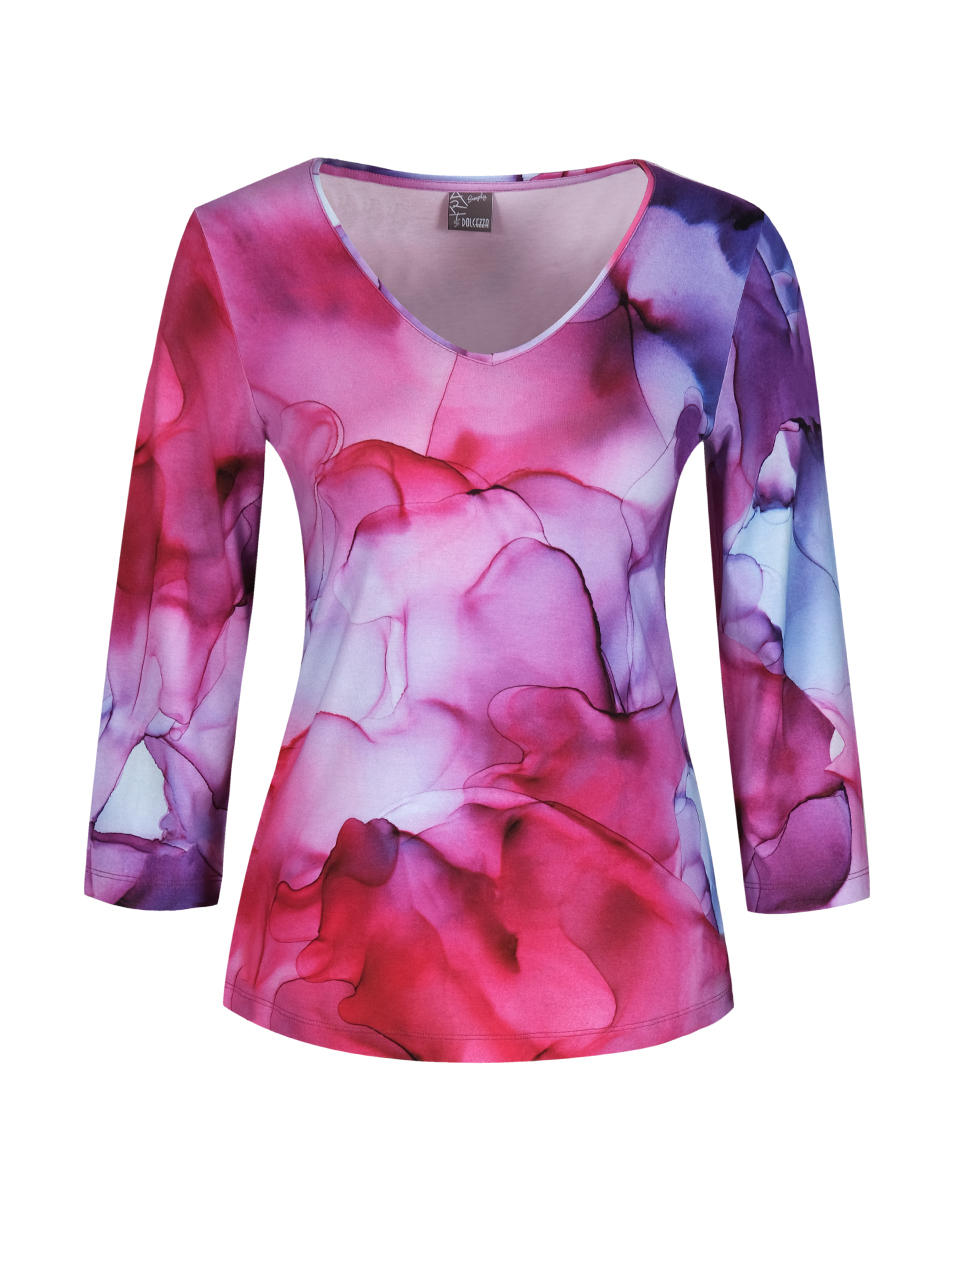 Simply Art Dolcezza: Red Purple Pink Three-Quarter Sleeve Comfort Top Dolcezza_SimplyArt_22770